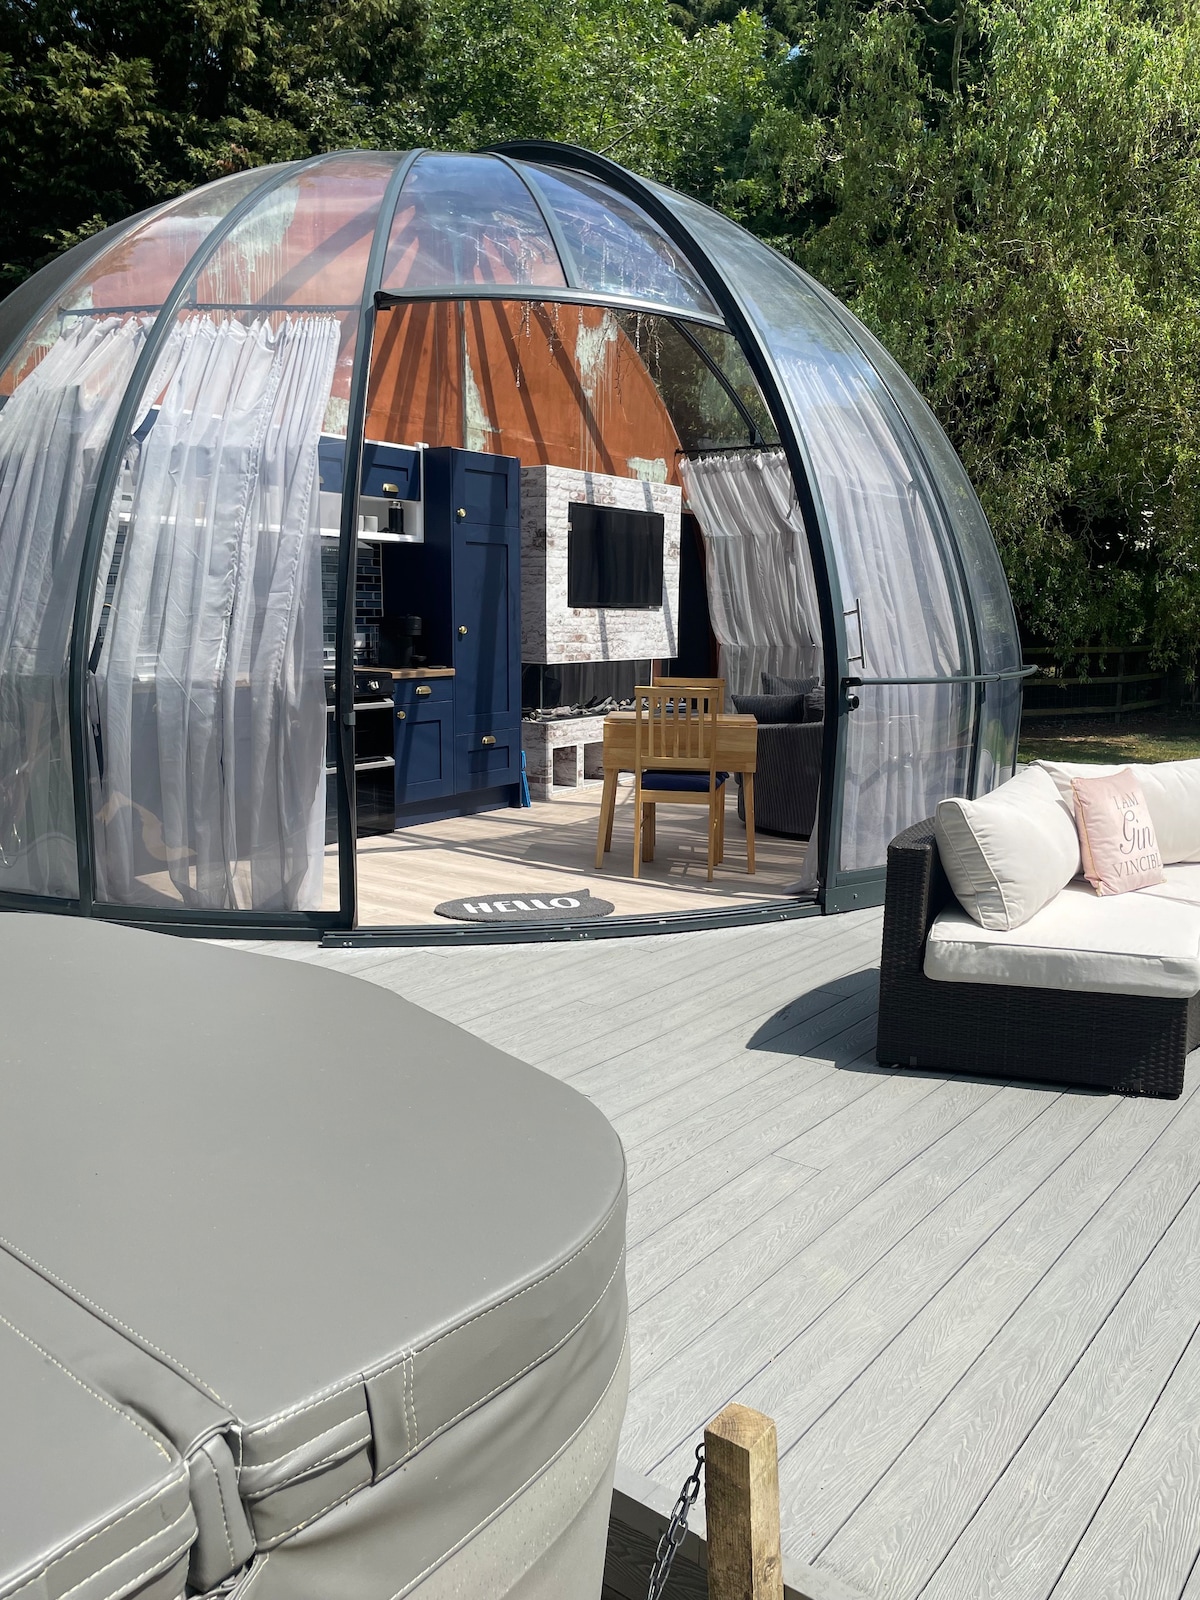 Tranquility Grange Glamping Dome